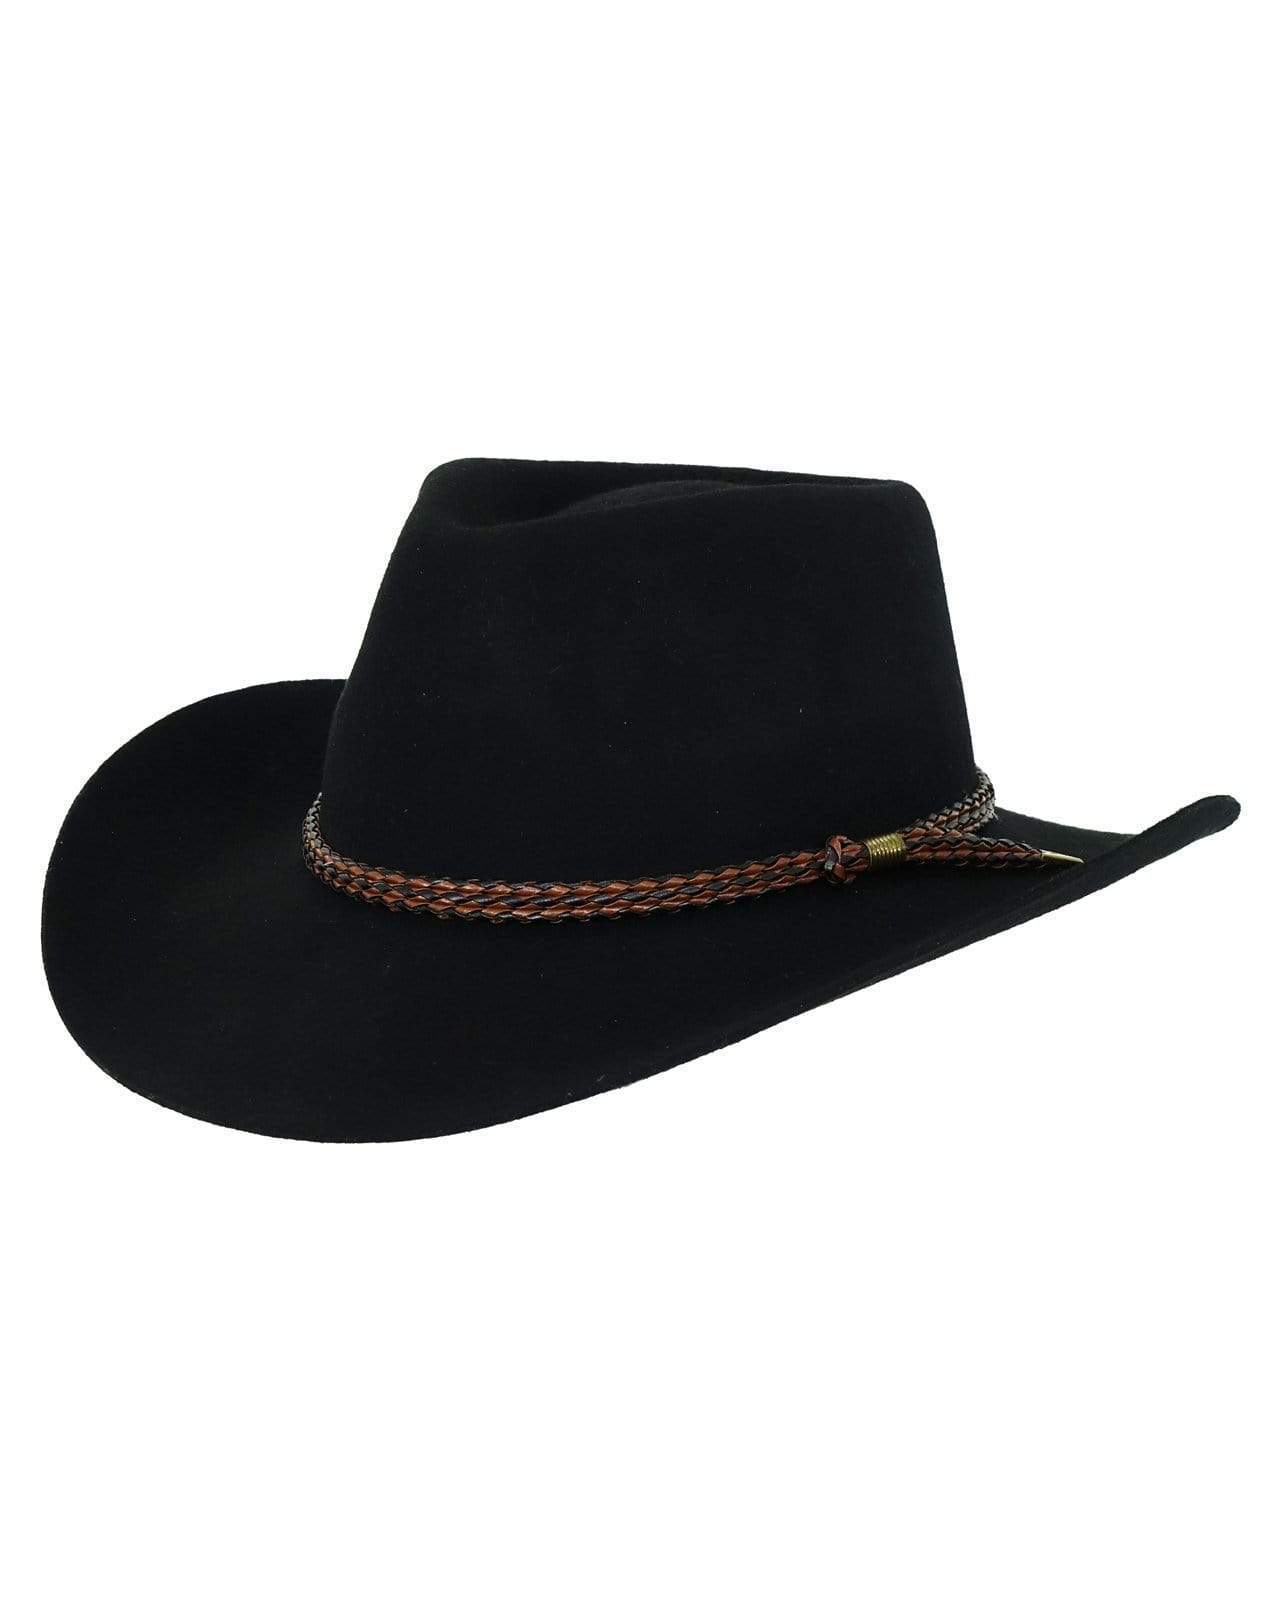 Outback Trading Company Forbes Black / S 1153-BLK-SM 089043285704 Hats